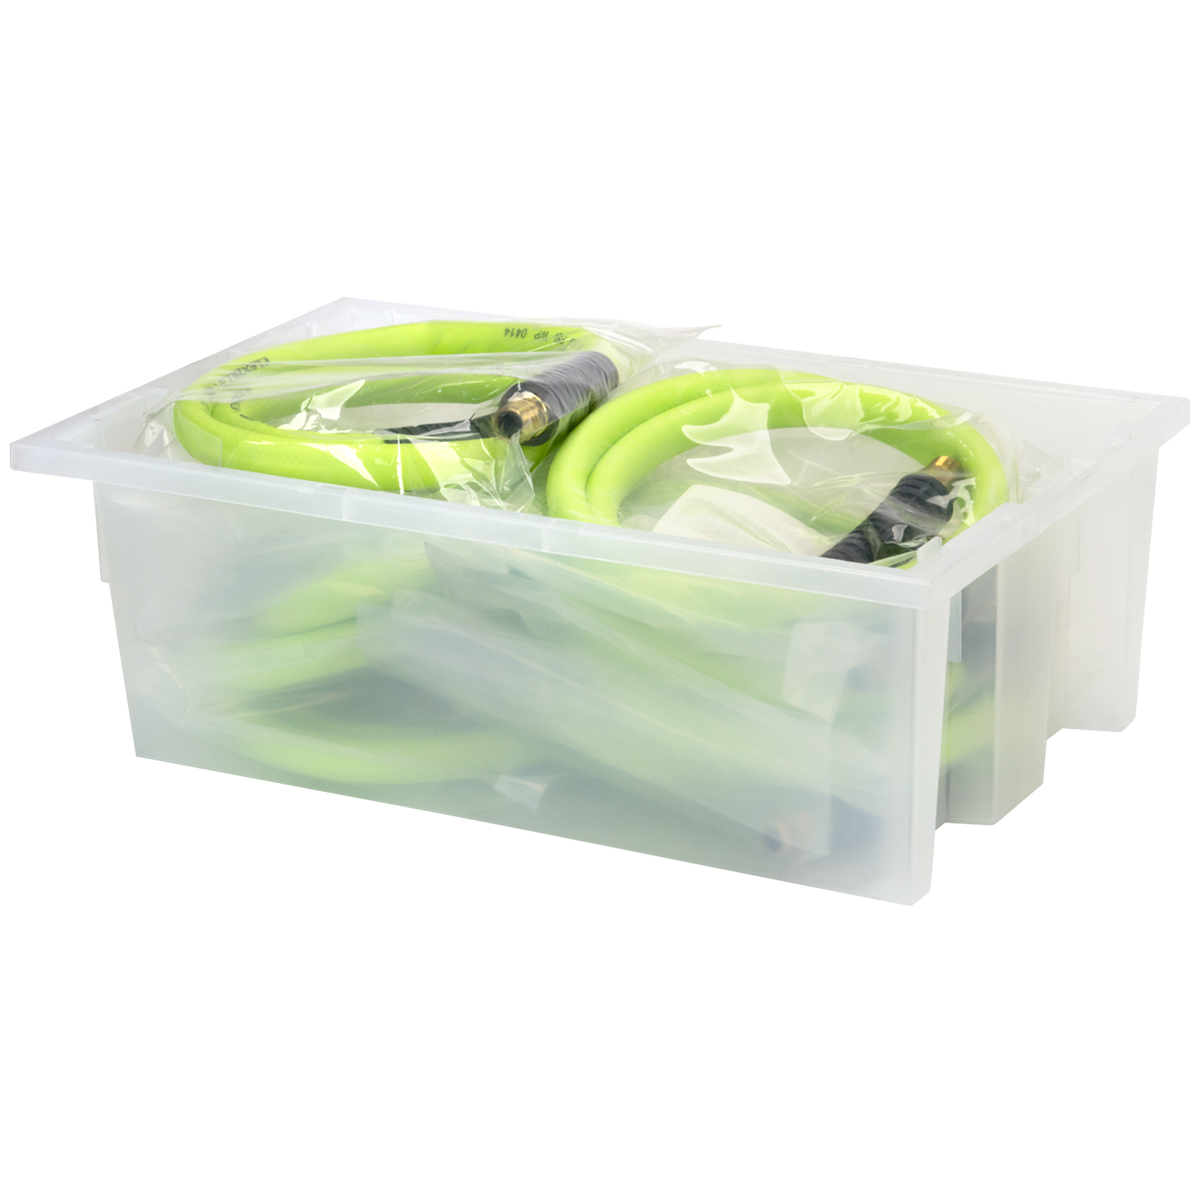 Akro-Mils Clear Nest & Stack Tote